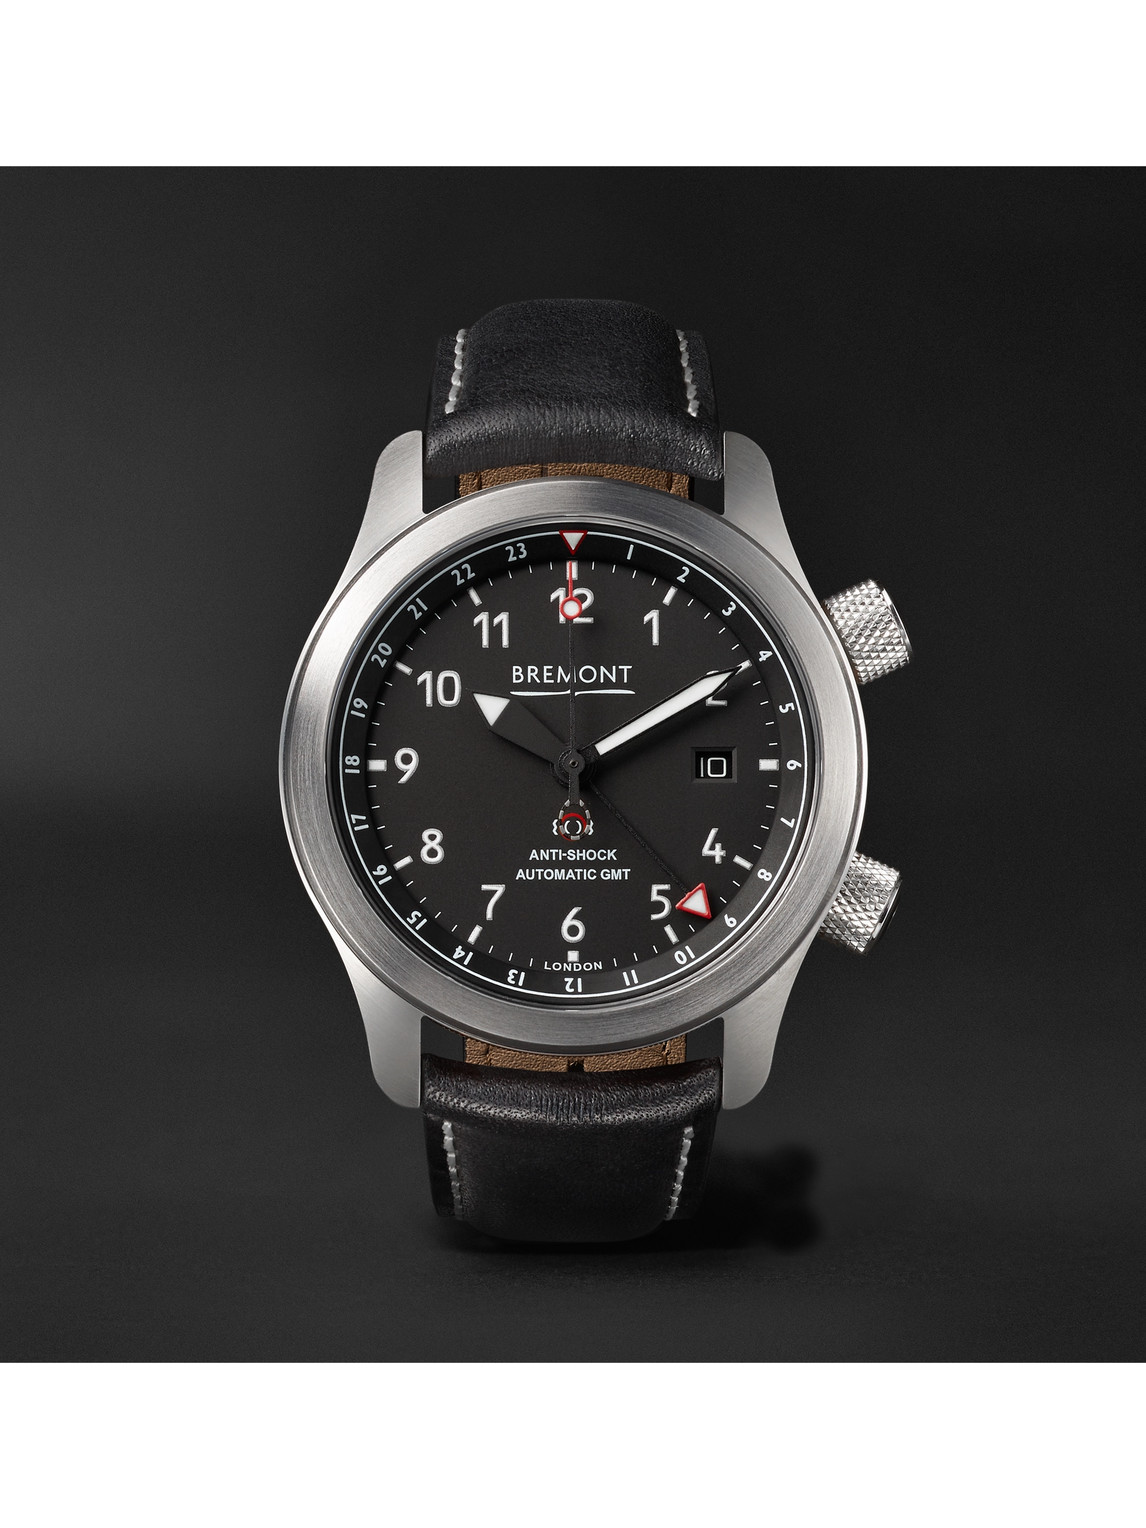 MBIII Black Bronze Automatic GMT 43mm Stainless Steel and Leather Watch, Ref. MBIII-BK-BZ-R-S